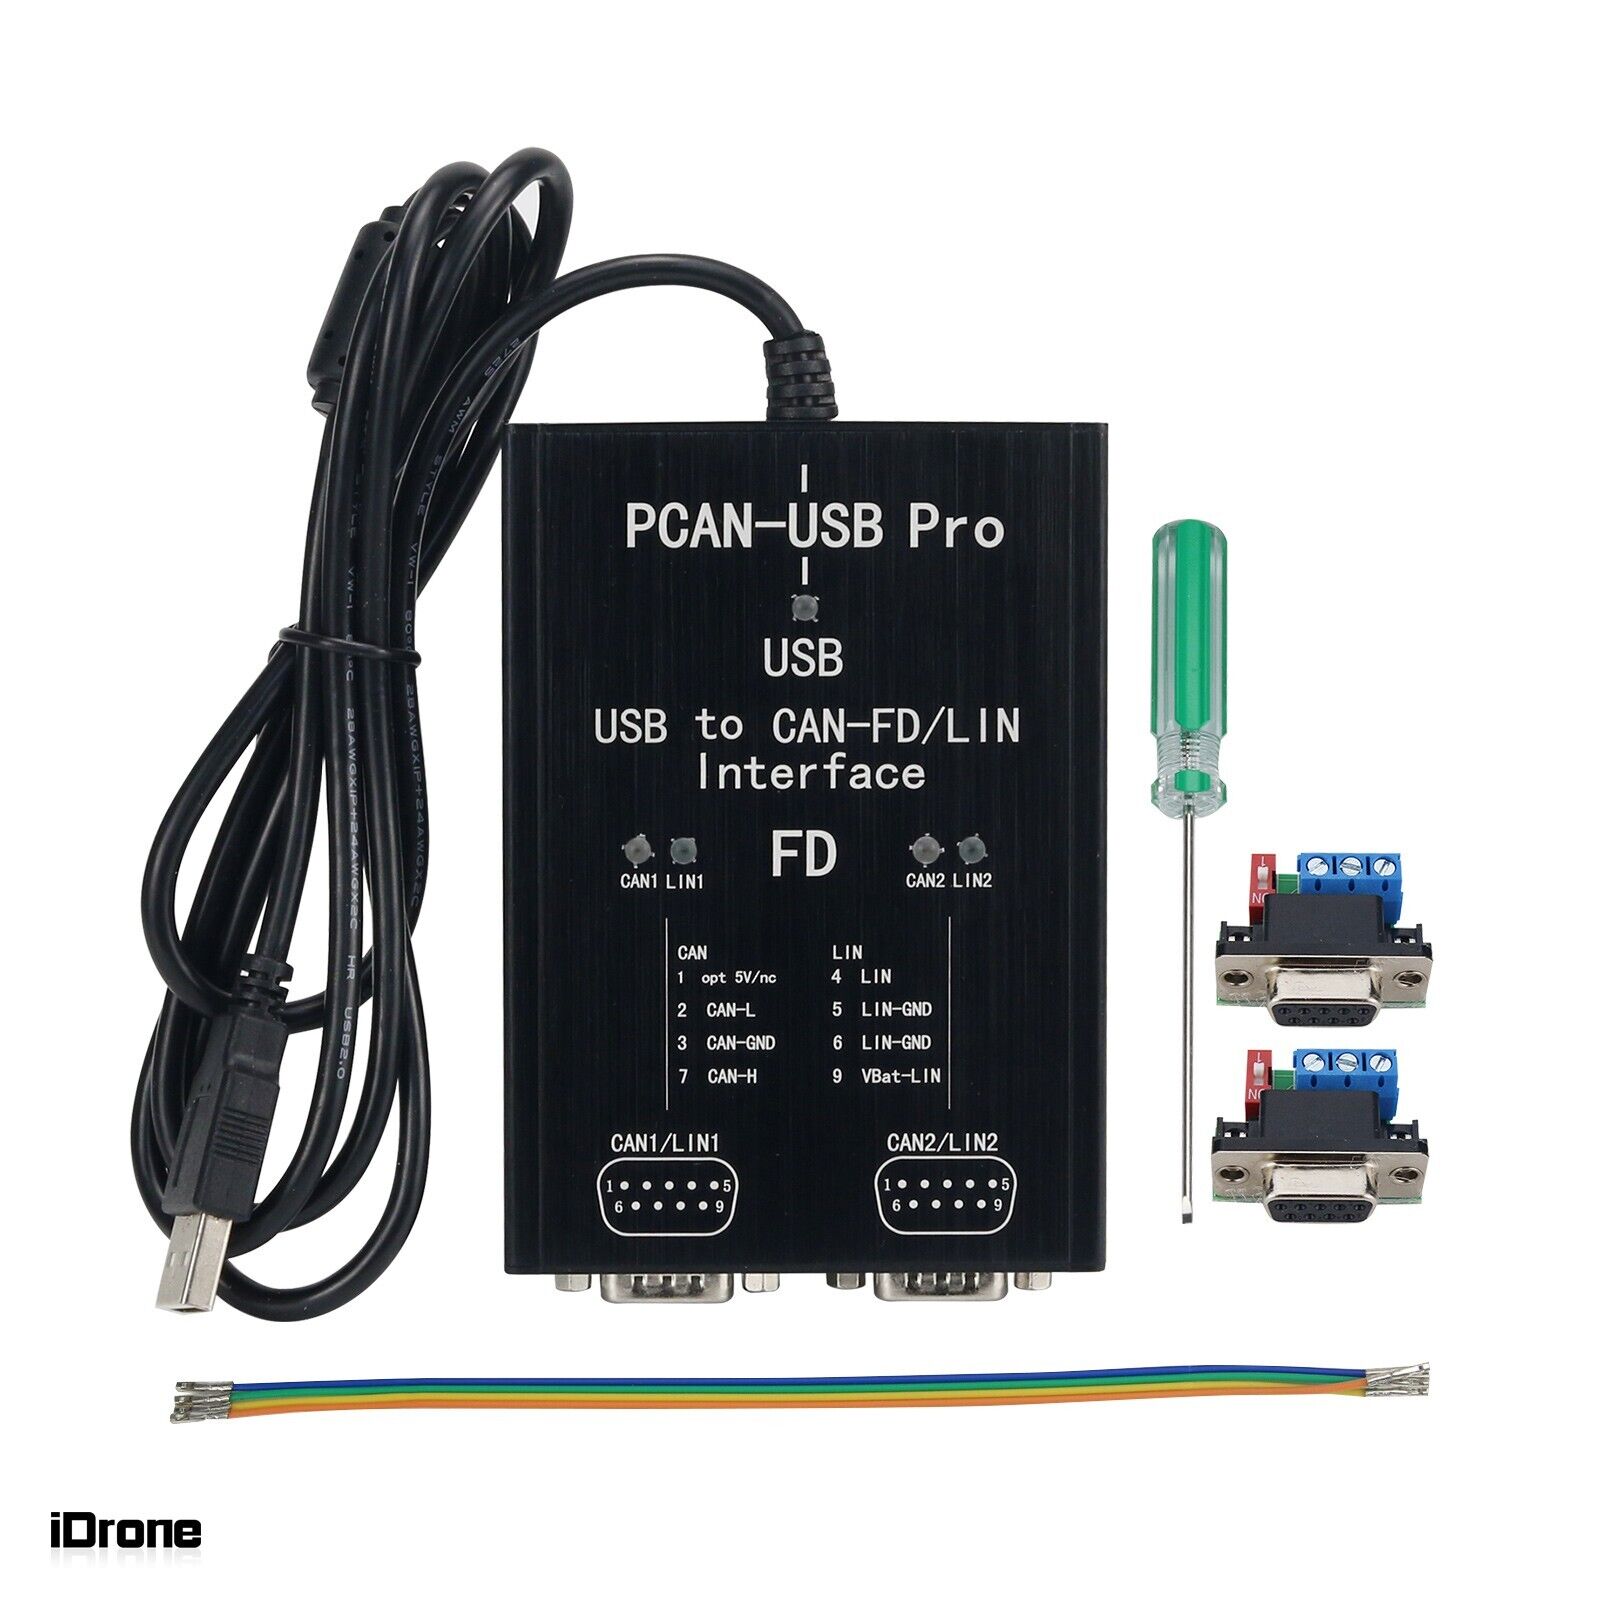 PCAN-USB Pro PCAN FD PRO 8Mbit/s USB to CAN Adapter 2CH CAN FD for IPEH-004061